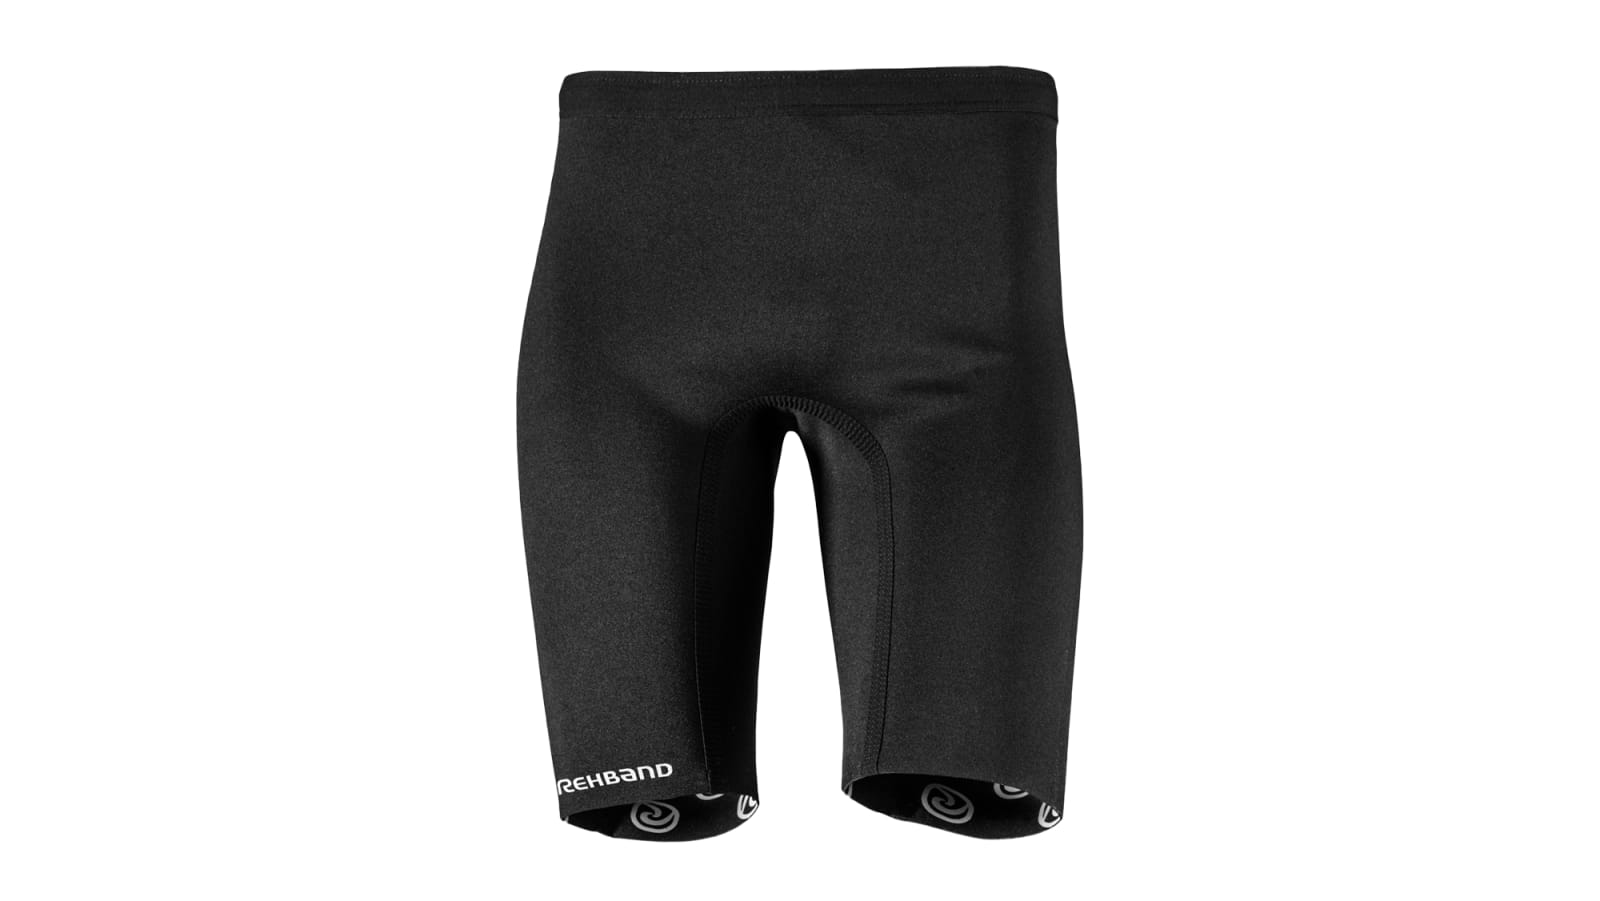 Rehband 7981 Warm Pants Compression Thermal Short Crossfit Weightlifting Power 